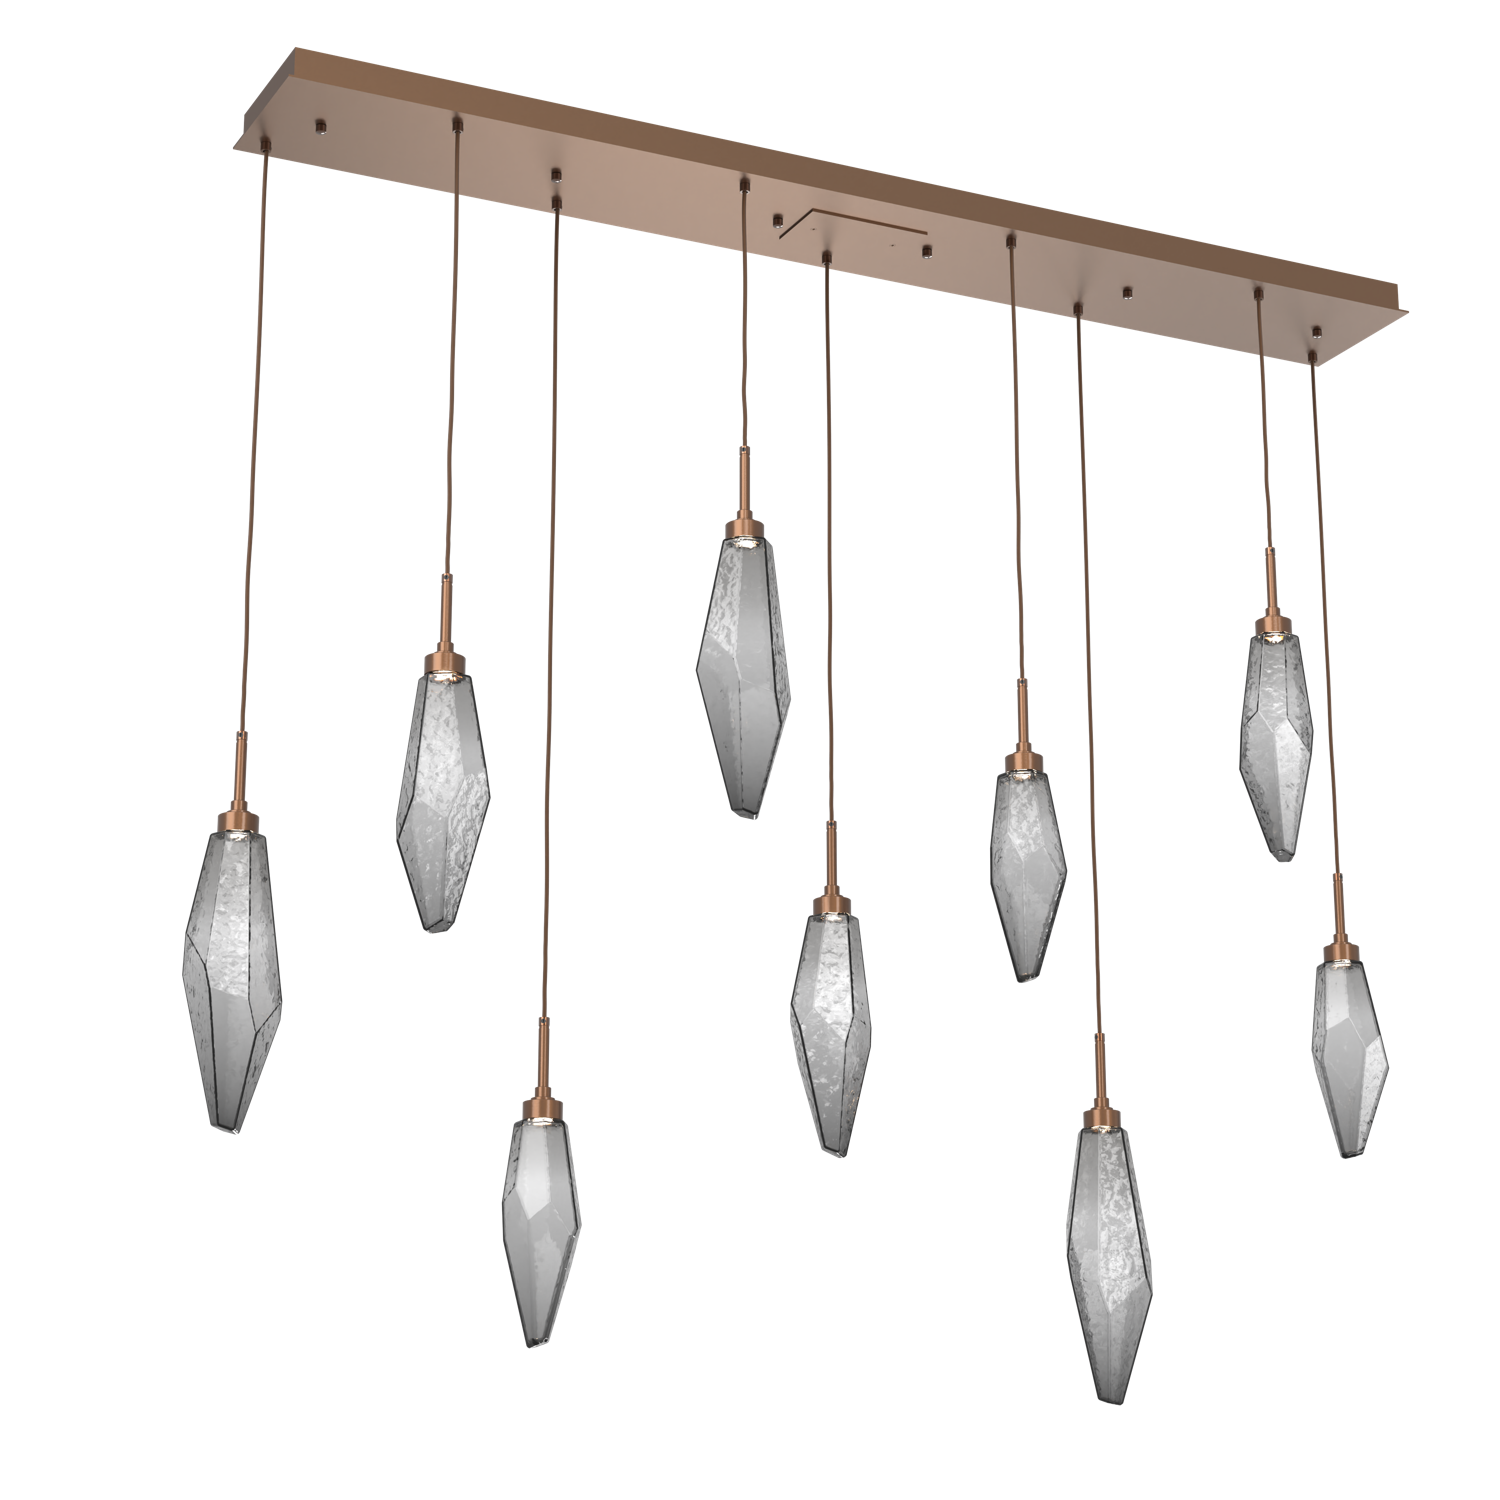 PLB0050-09-BB-CS-Hammerton-Studio-Rock-Crystal-9-light-linear-pendant-chandelier-with-burnished-bronze-finish-and-chilled-smoke-glass-shades-and-LED-lamping